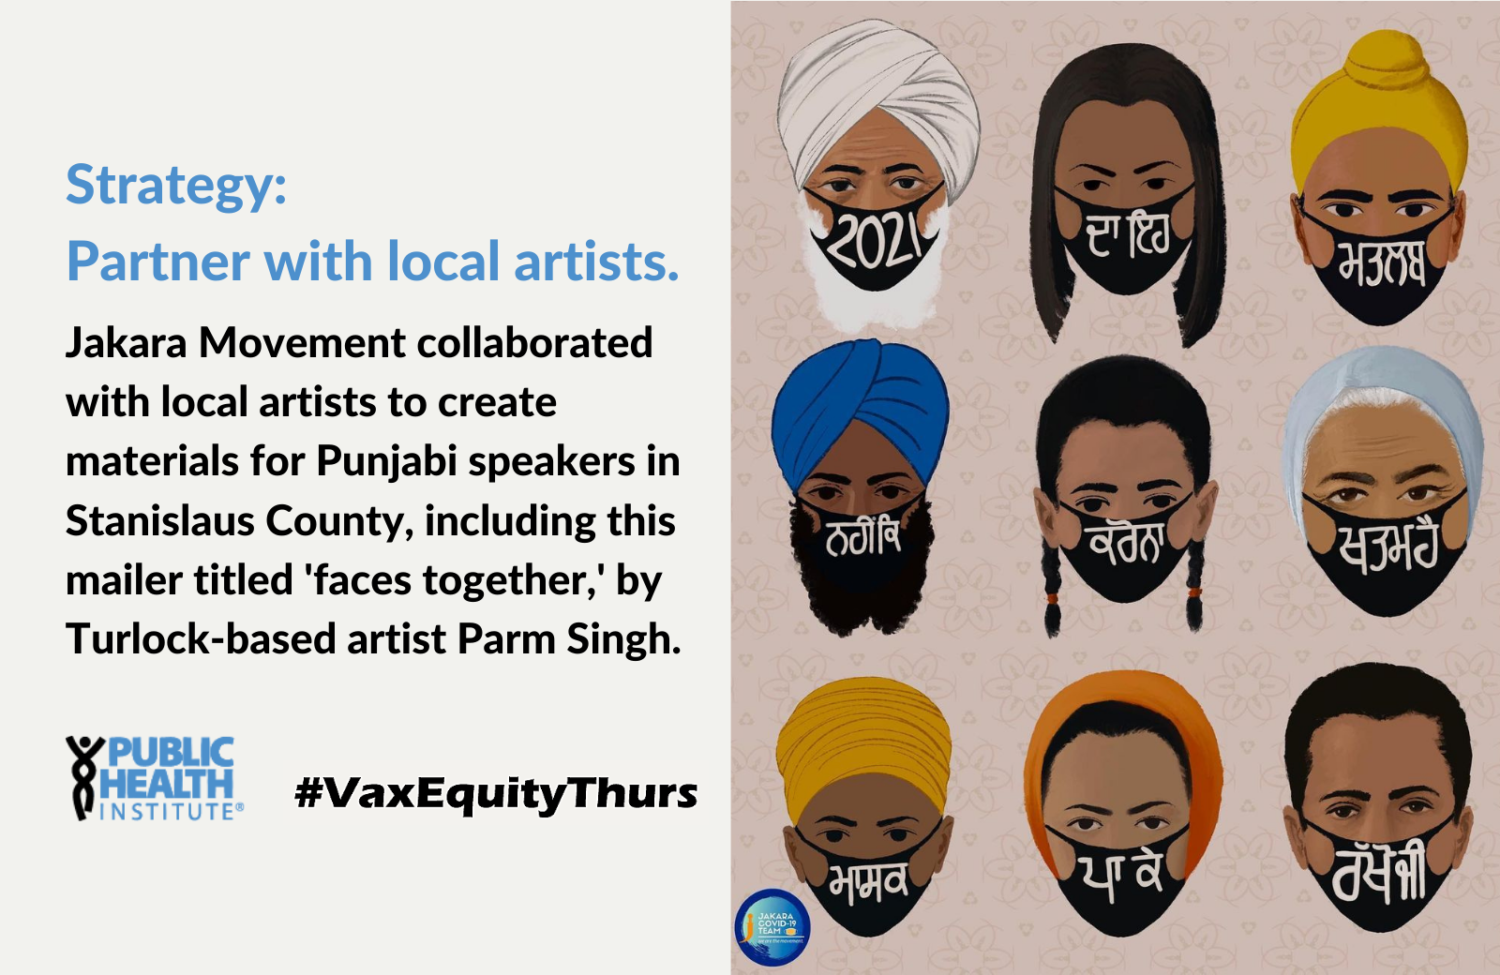 Strategy: Partner with local artists. Jakara Movement collaborated with local artists to create materials for Punjabi speakers in Stanislaus County, including this mailer titled 'faces together,' by Turlock-based artist Parm Singh.